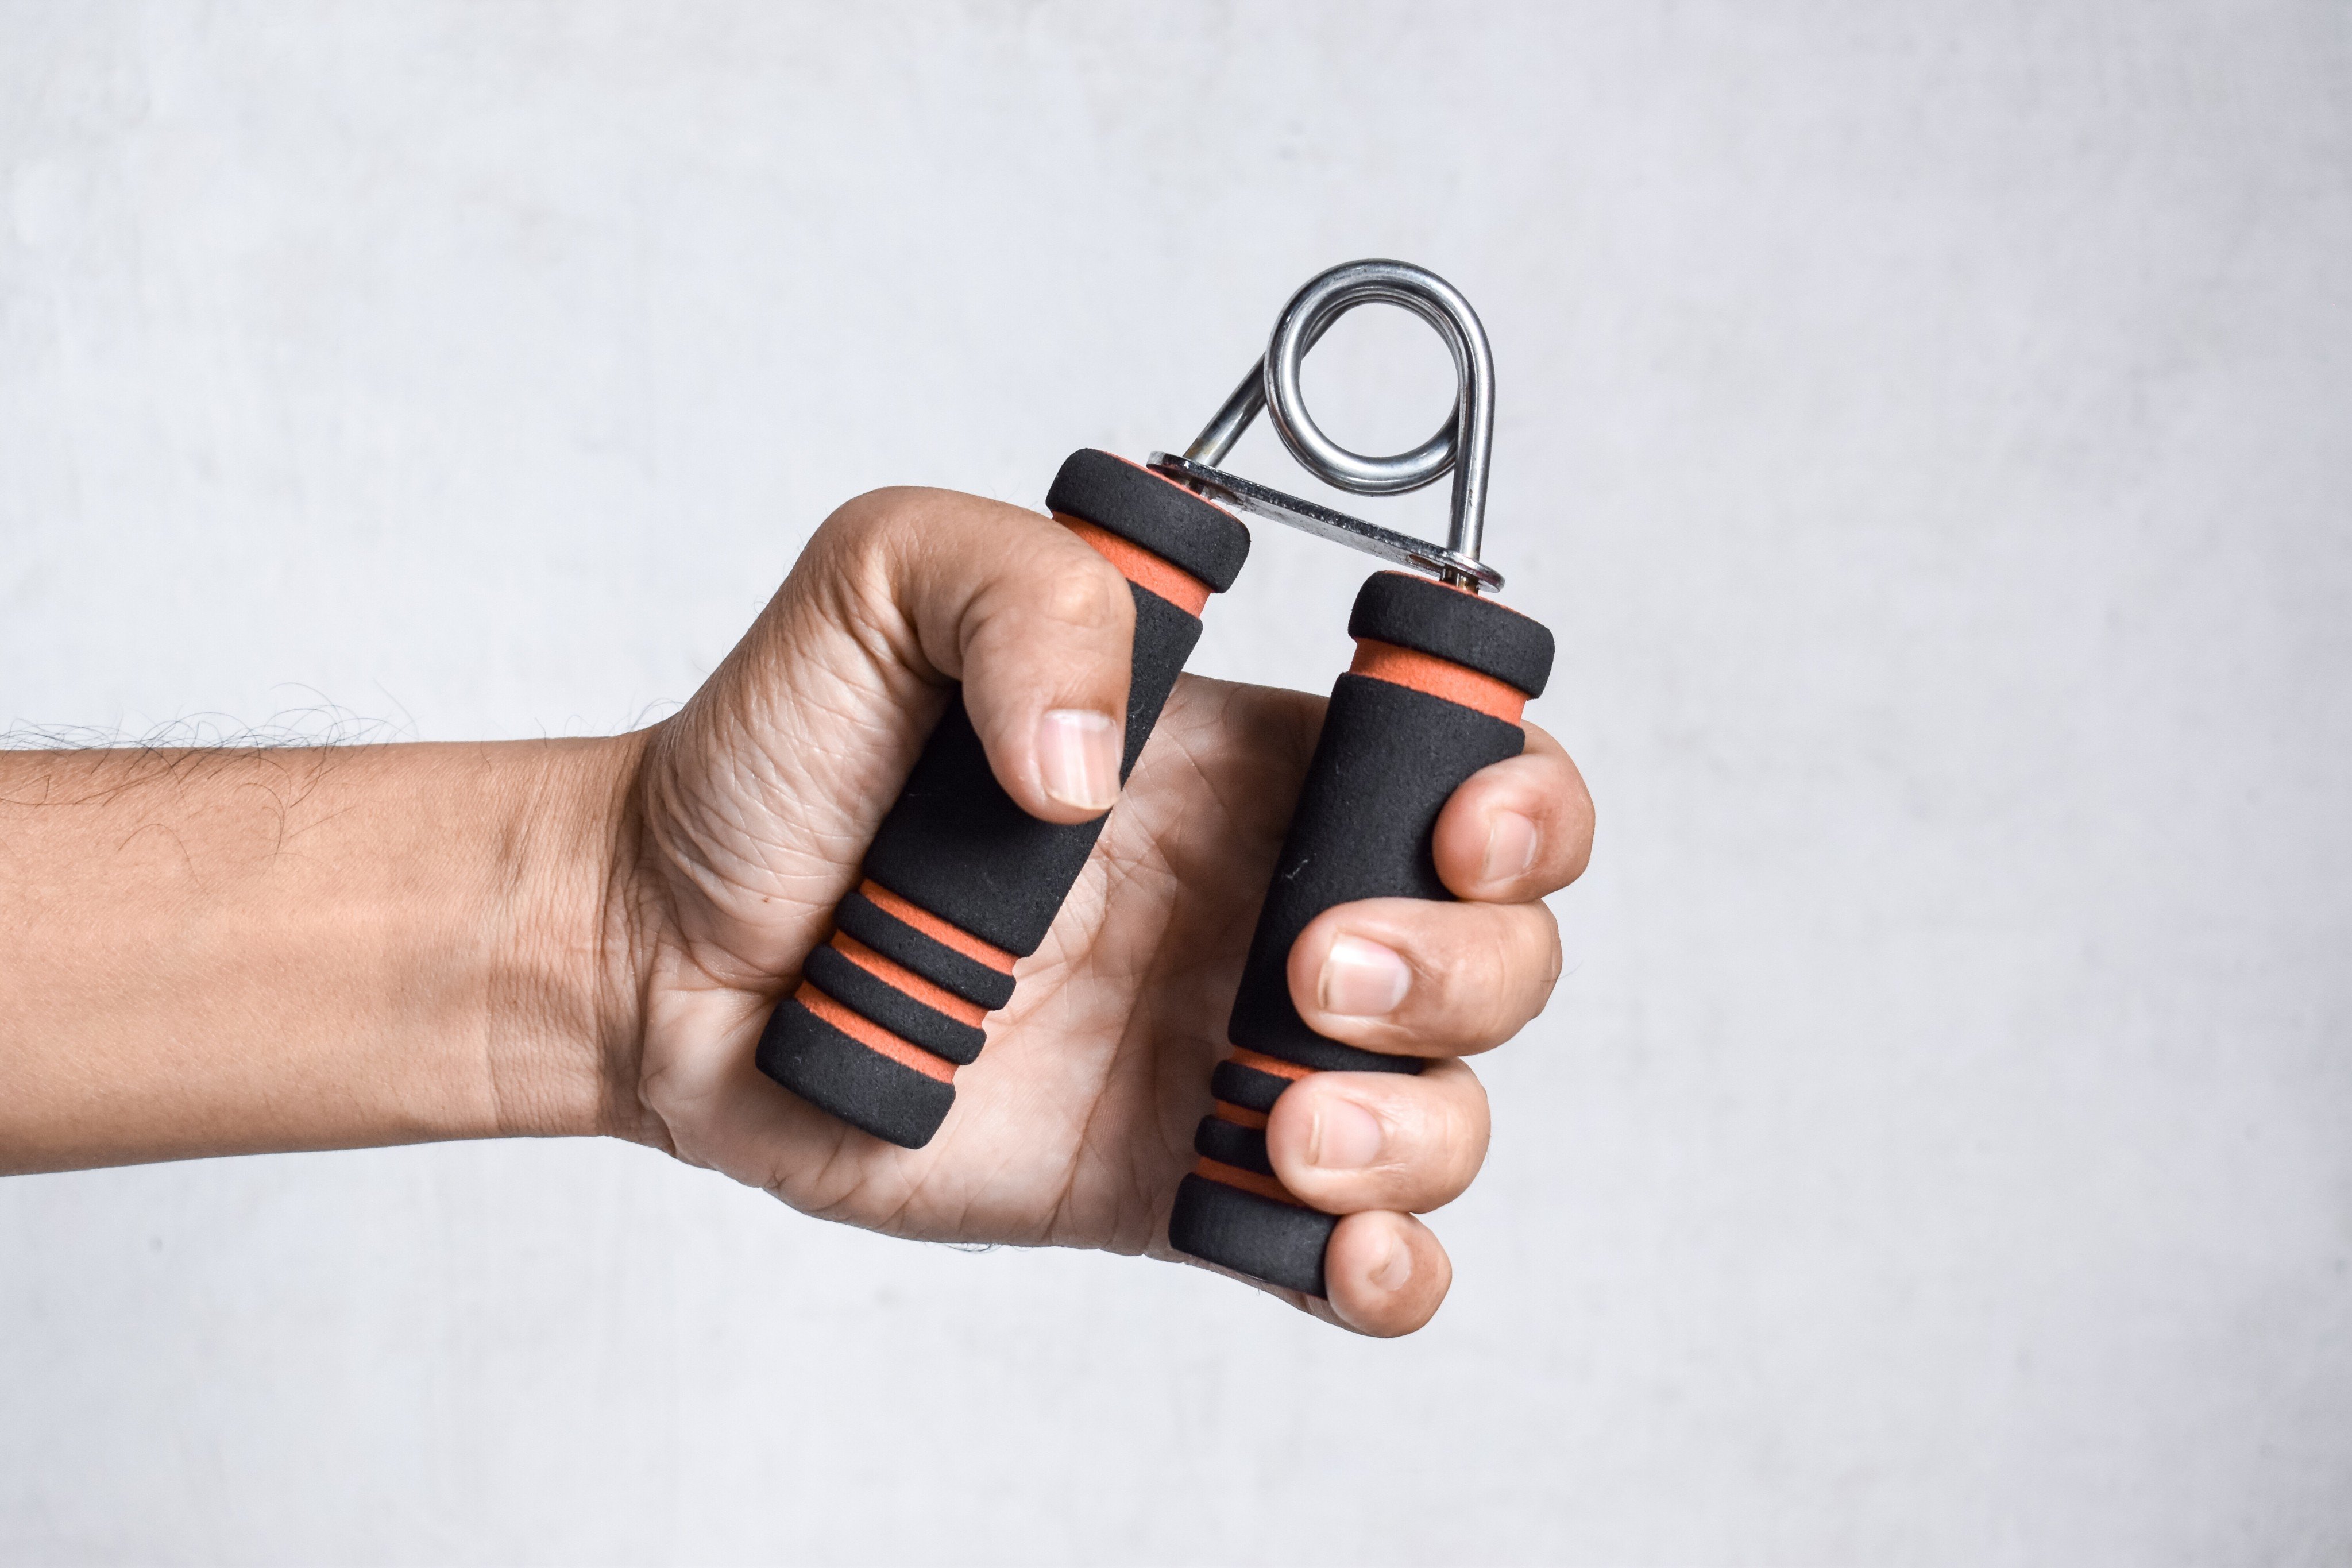 Grip strength is a good measure of overall health, doctors say, and a strong grip is linked with a slower rate of ageing. A weak grip is linked with depression and higher risk of death from stroke or heart attack. Photo: Shutterstock